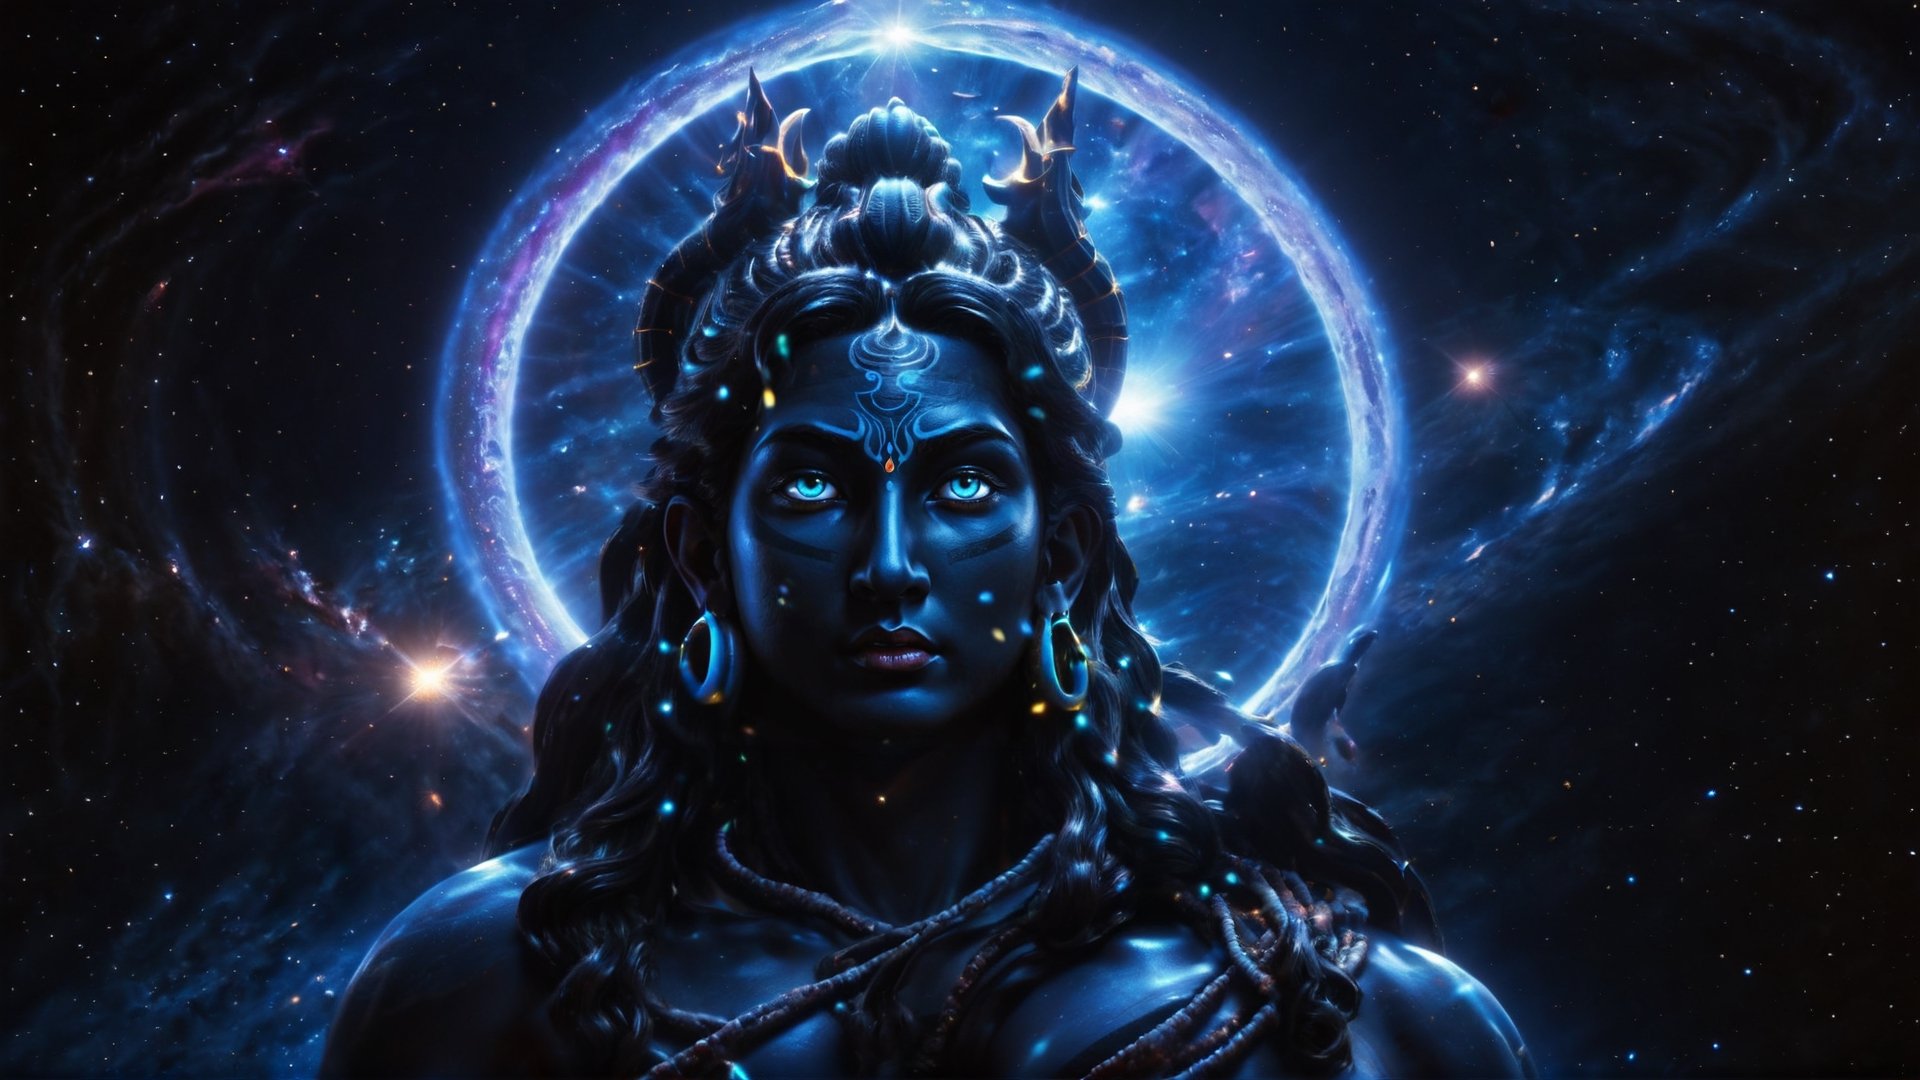 (((Cinematic a transparent of giant Lord Shiva's face in universe:2))), serene, Epic scene, God of destruction, stars, galaxy surround, (galaxy_way_spiral:1.5), glowing, aura, floating objects, magnetic field, sprial, spectral, astral